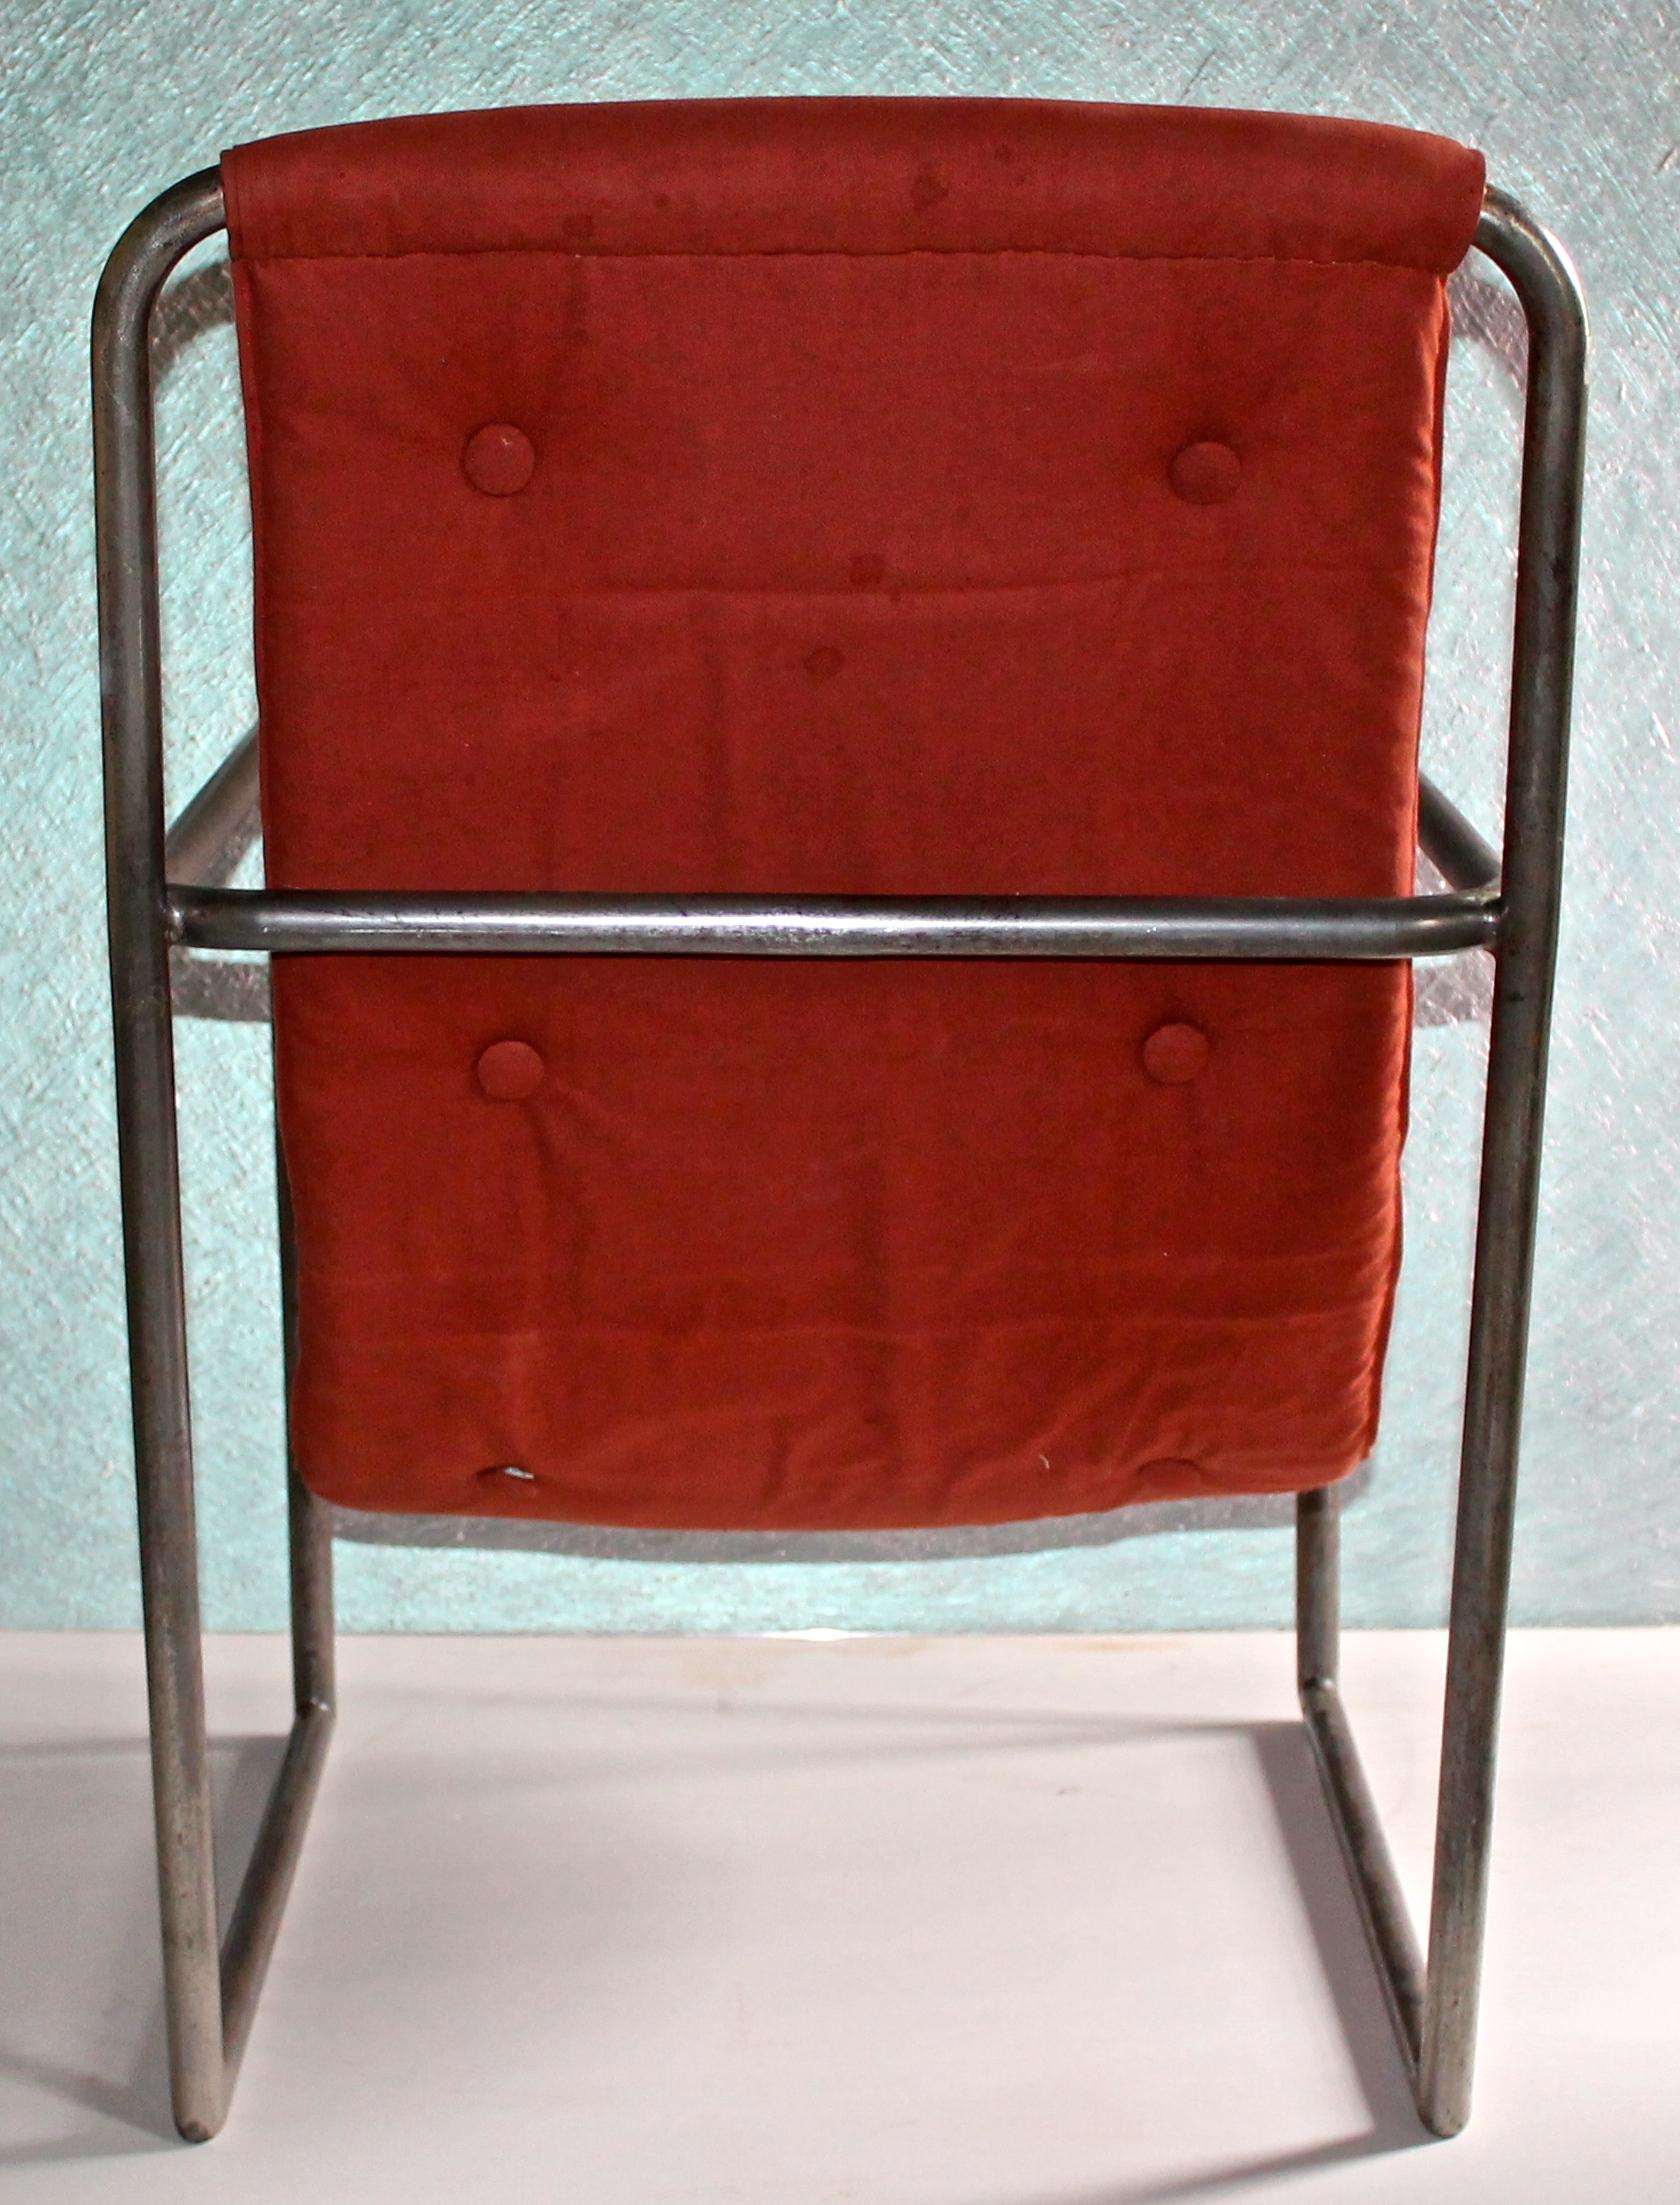 Louis Sognot Rare Tubular Sling Armchair for Maurice Dufrene 'La Maitrise', 1928 In Good Condition For Sale In Sharon, CT